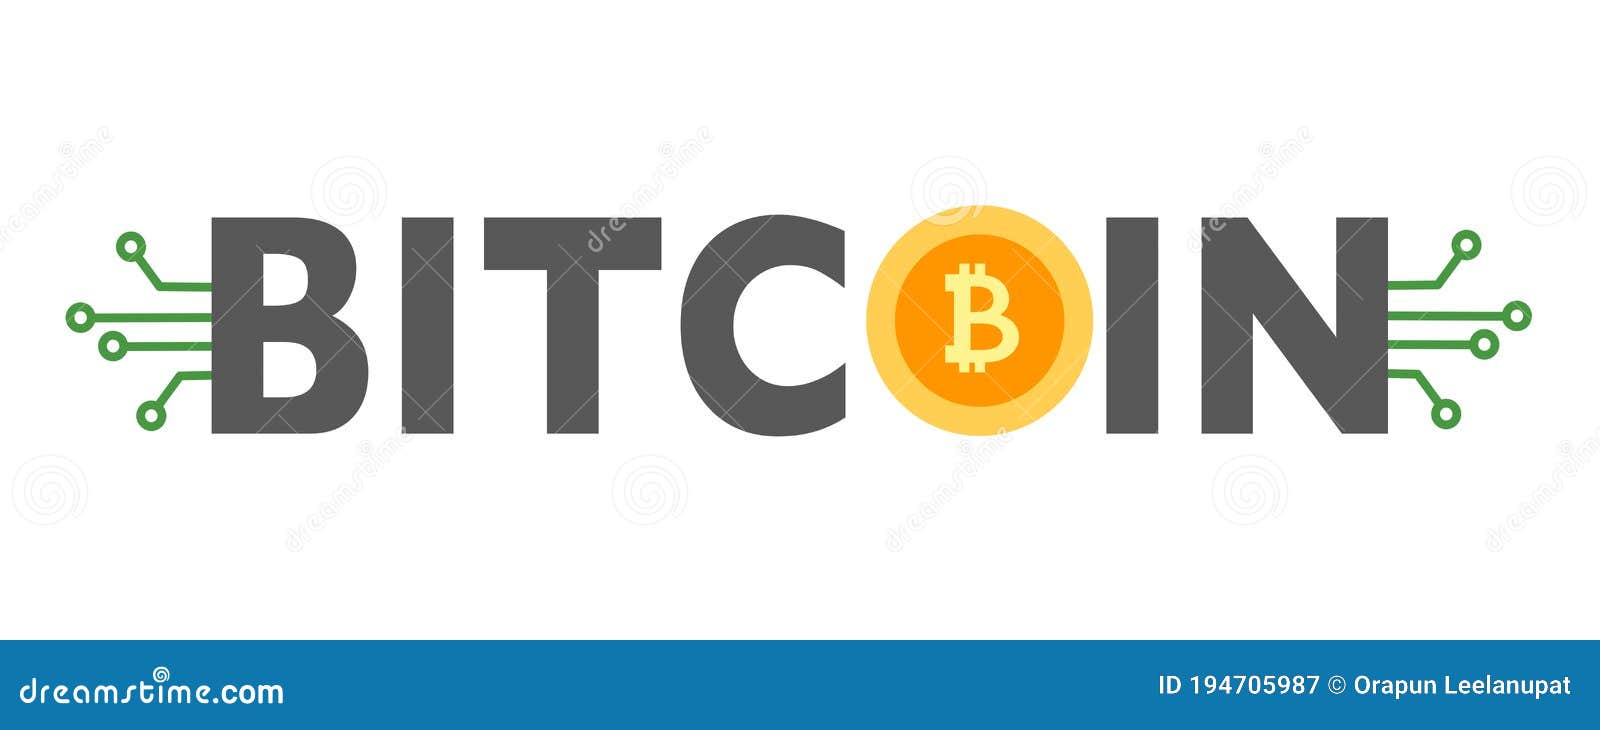 bitcoin digital currency icon with text and circuit board s in flat . cryptocurrency digital money. block chain finan